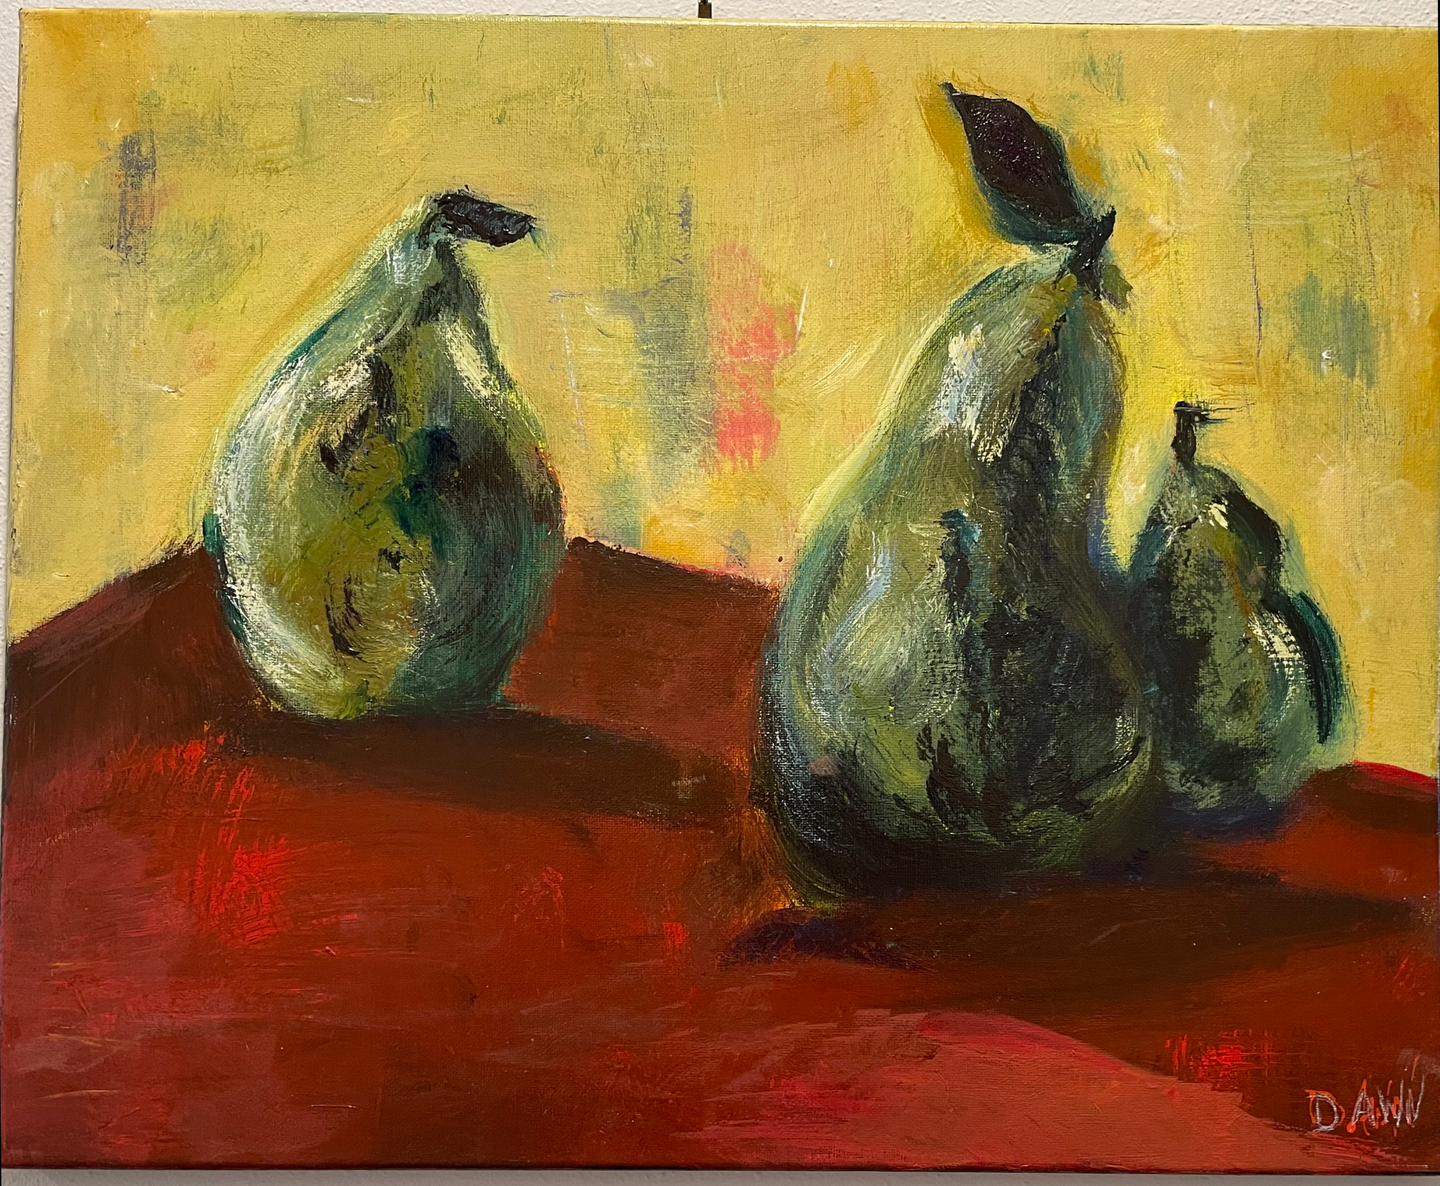 FORESHADOWING {3 Pears & the Truth} ☼ It's Still Life! Painting {Original} Pears painting kitchen art